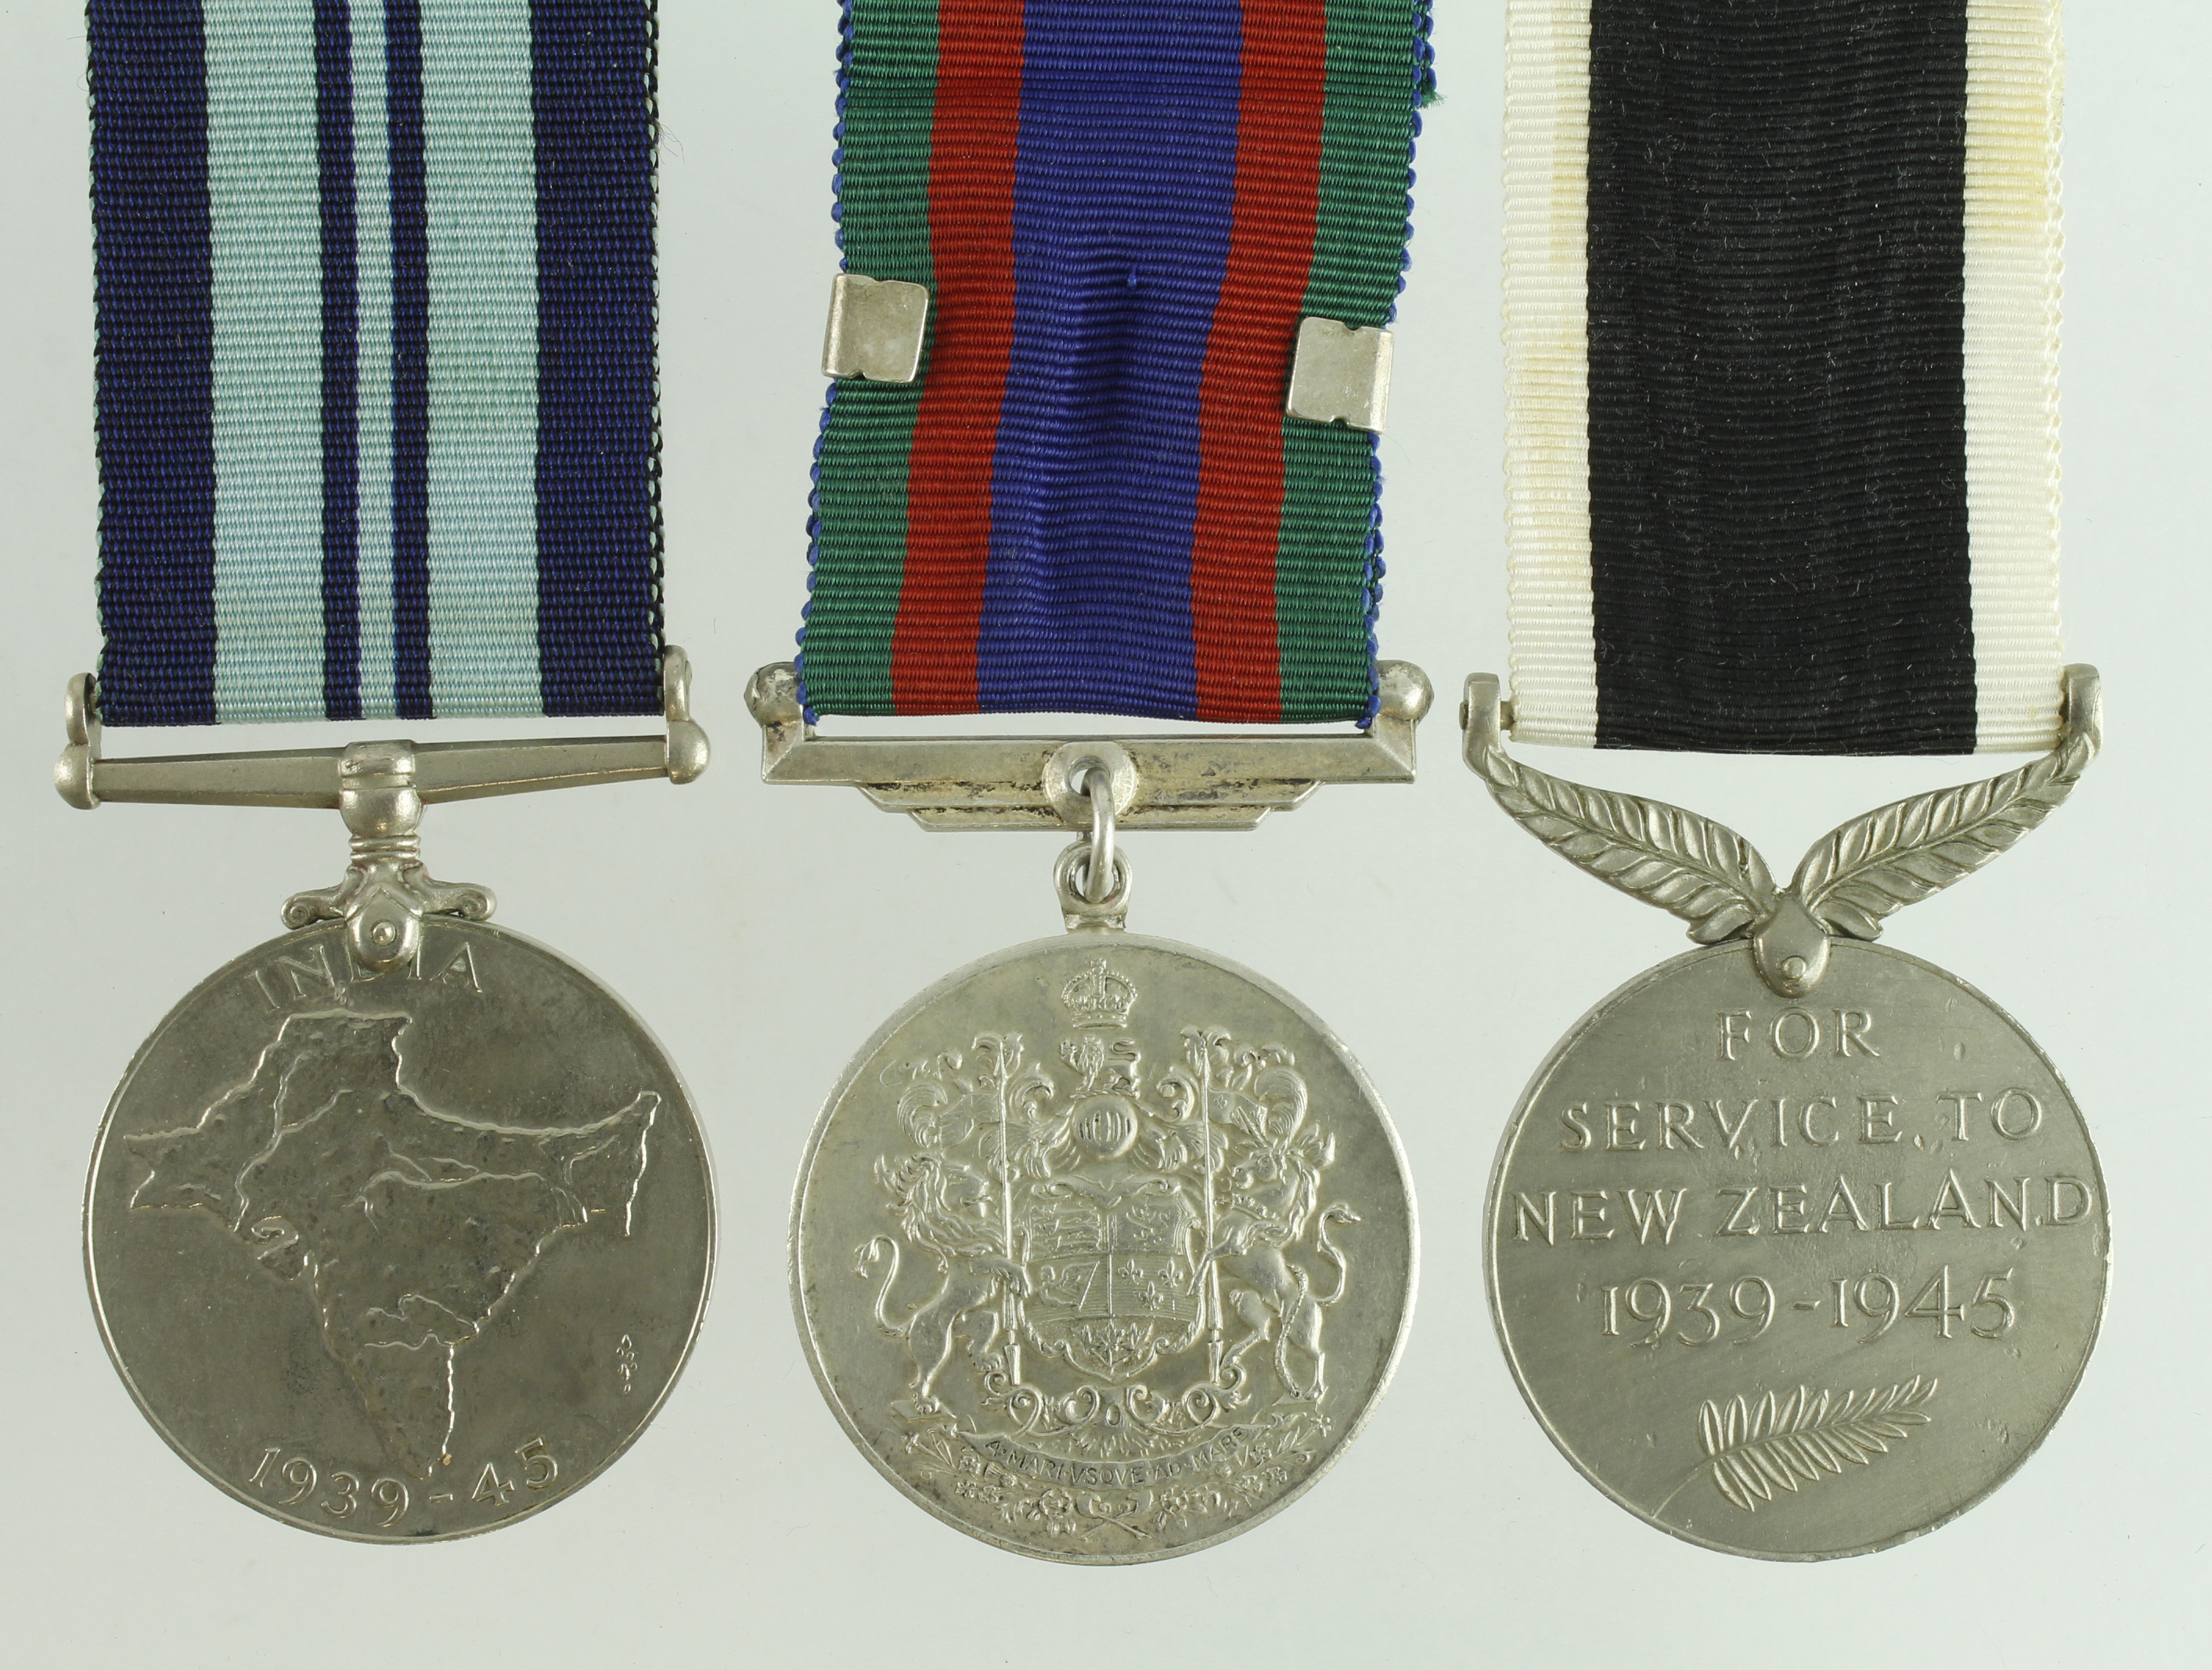 New Zealand Service Medal 1939-45, India Medal 1939-45, and Canadian Voluntary Service Medal 1939-45 - Bild 2 aus 2